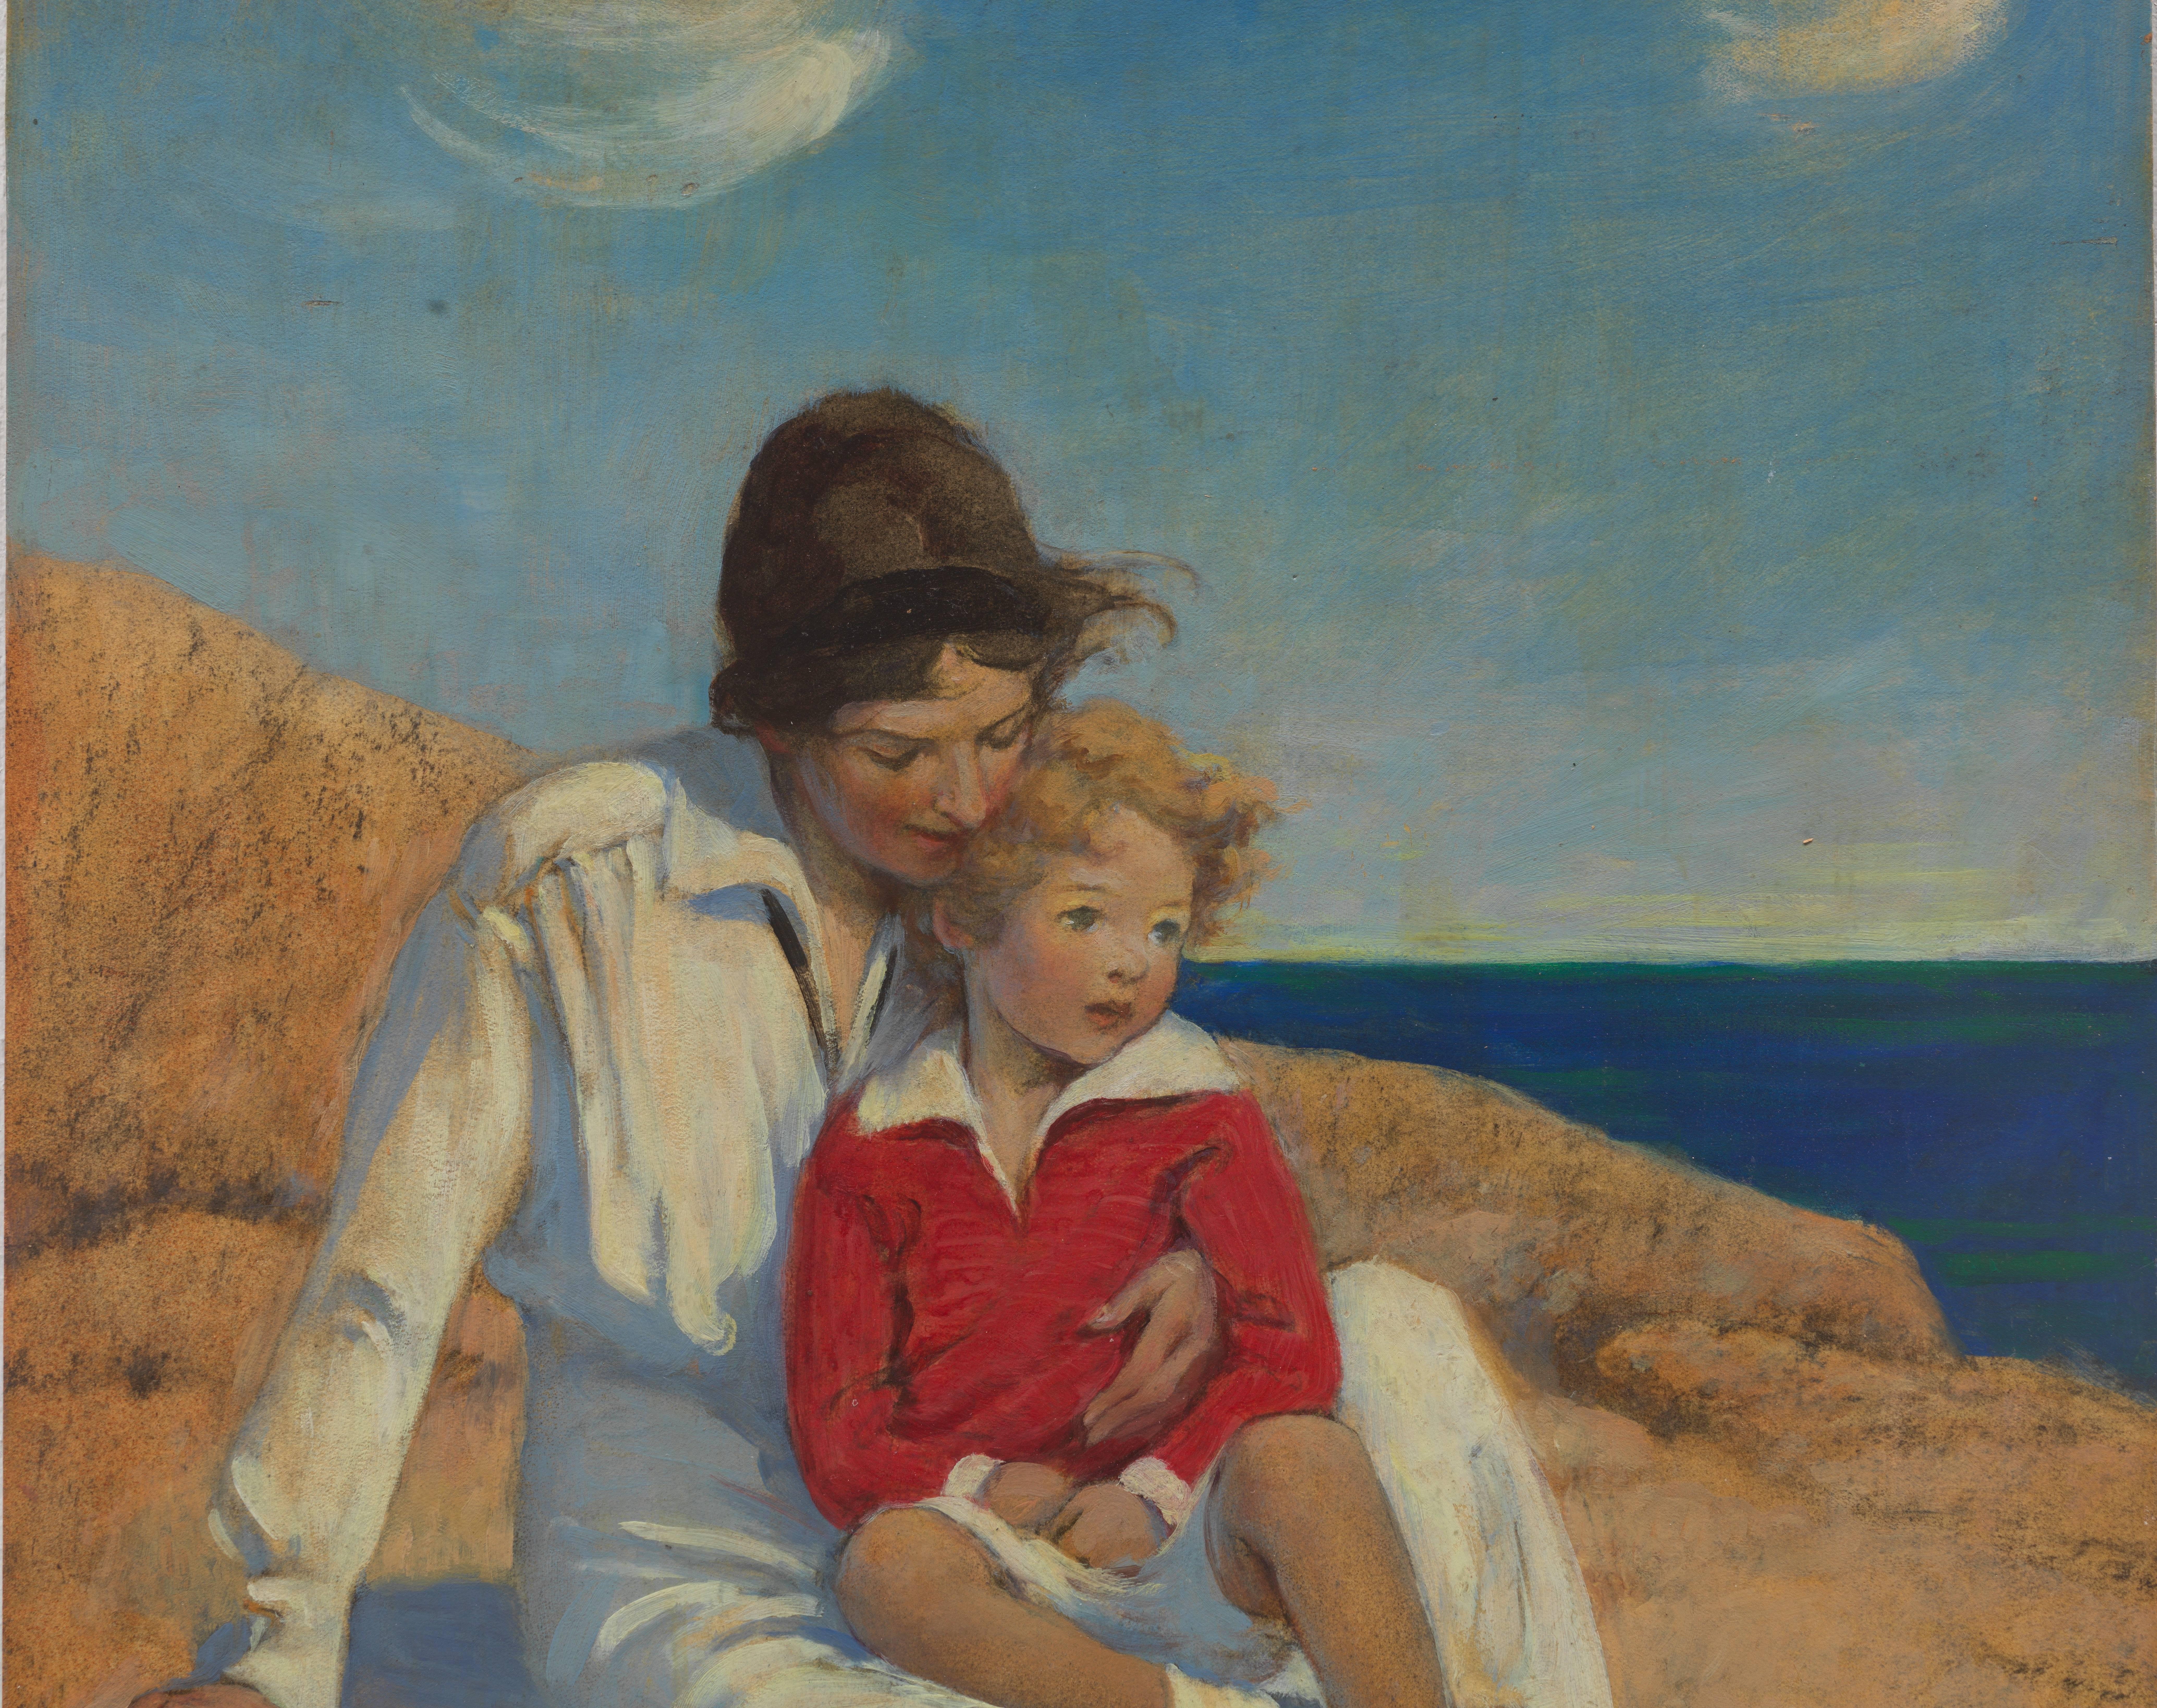 Mother's Own - Gray Figurative Painting by Jessie Willcox Smith